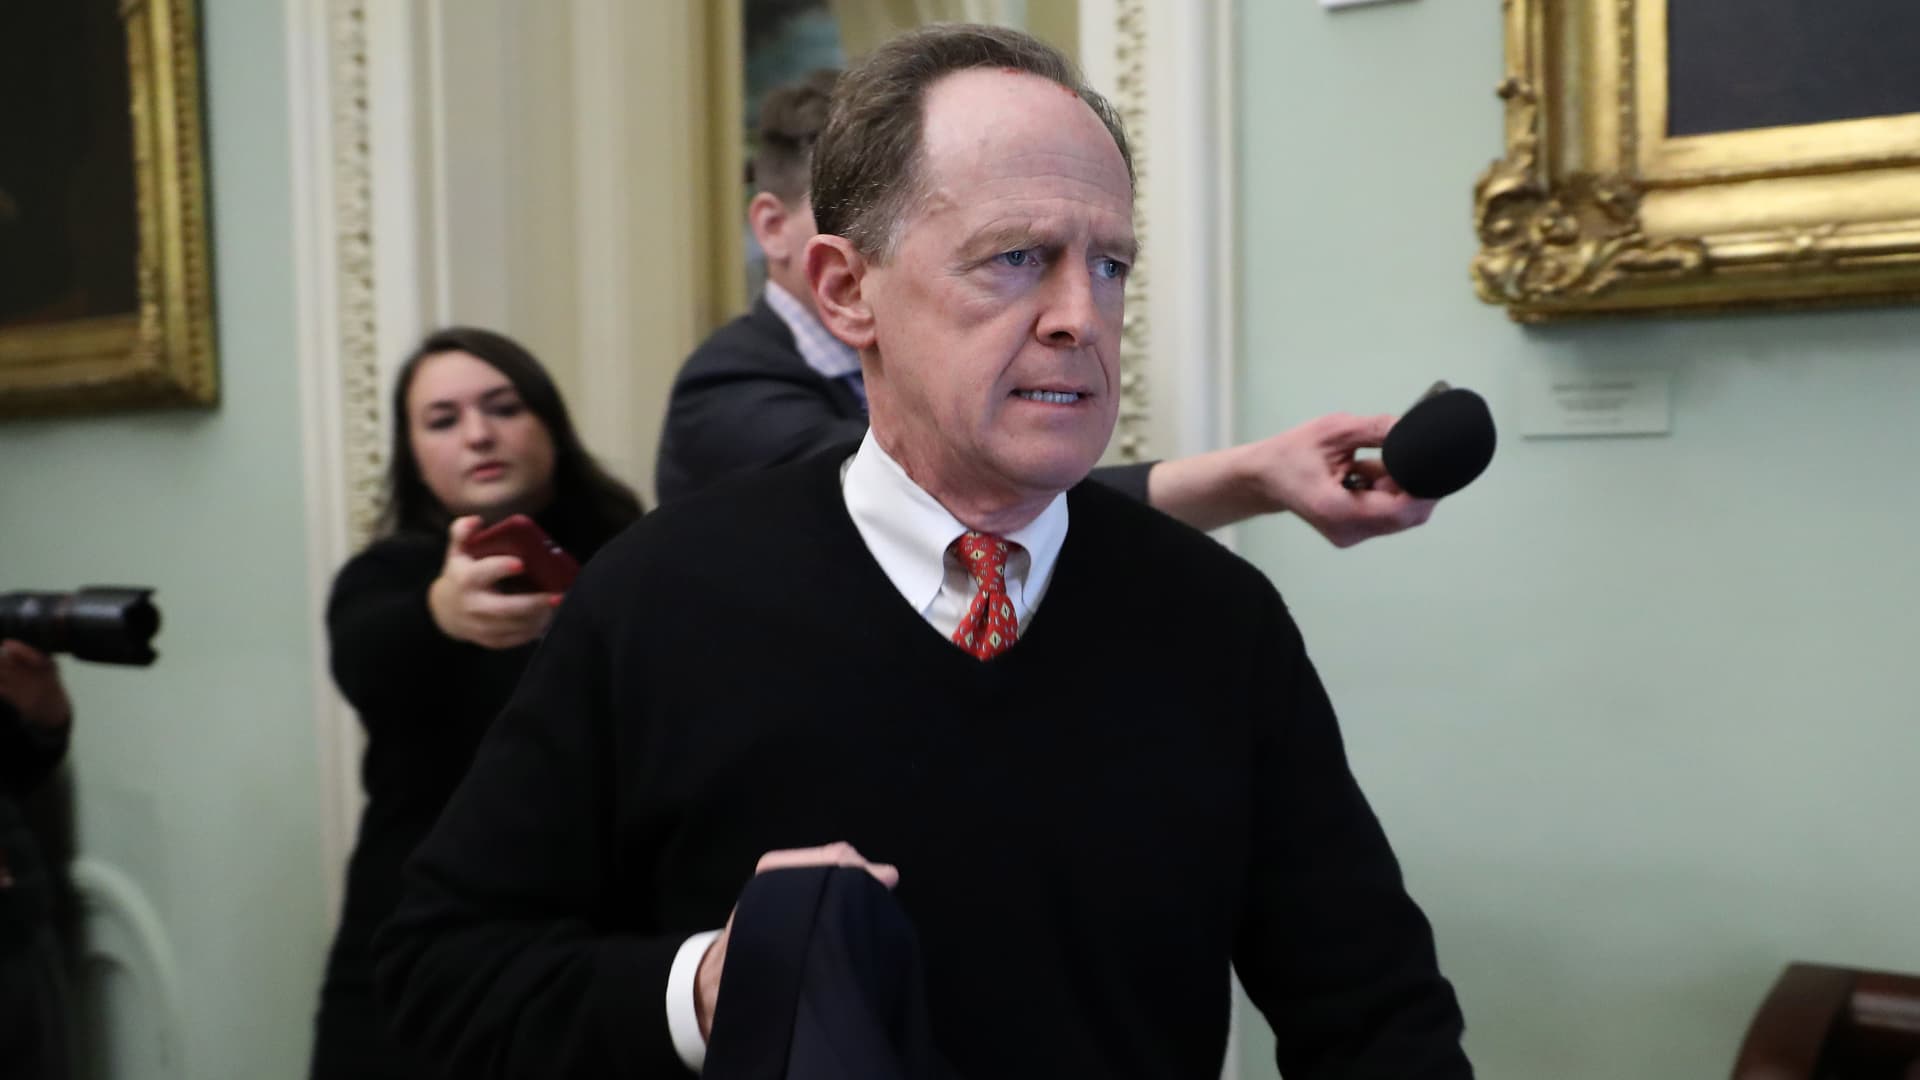 Sen. Pat Toomey (R-PA) quickly walks past reporters as he arrives for the weekly Senate Republican policy luncheon at the U.S. Capitol January 21, 2020 in Washington, DC.